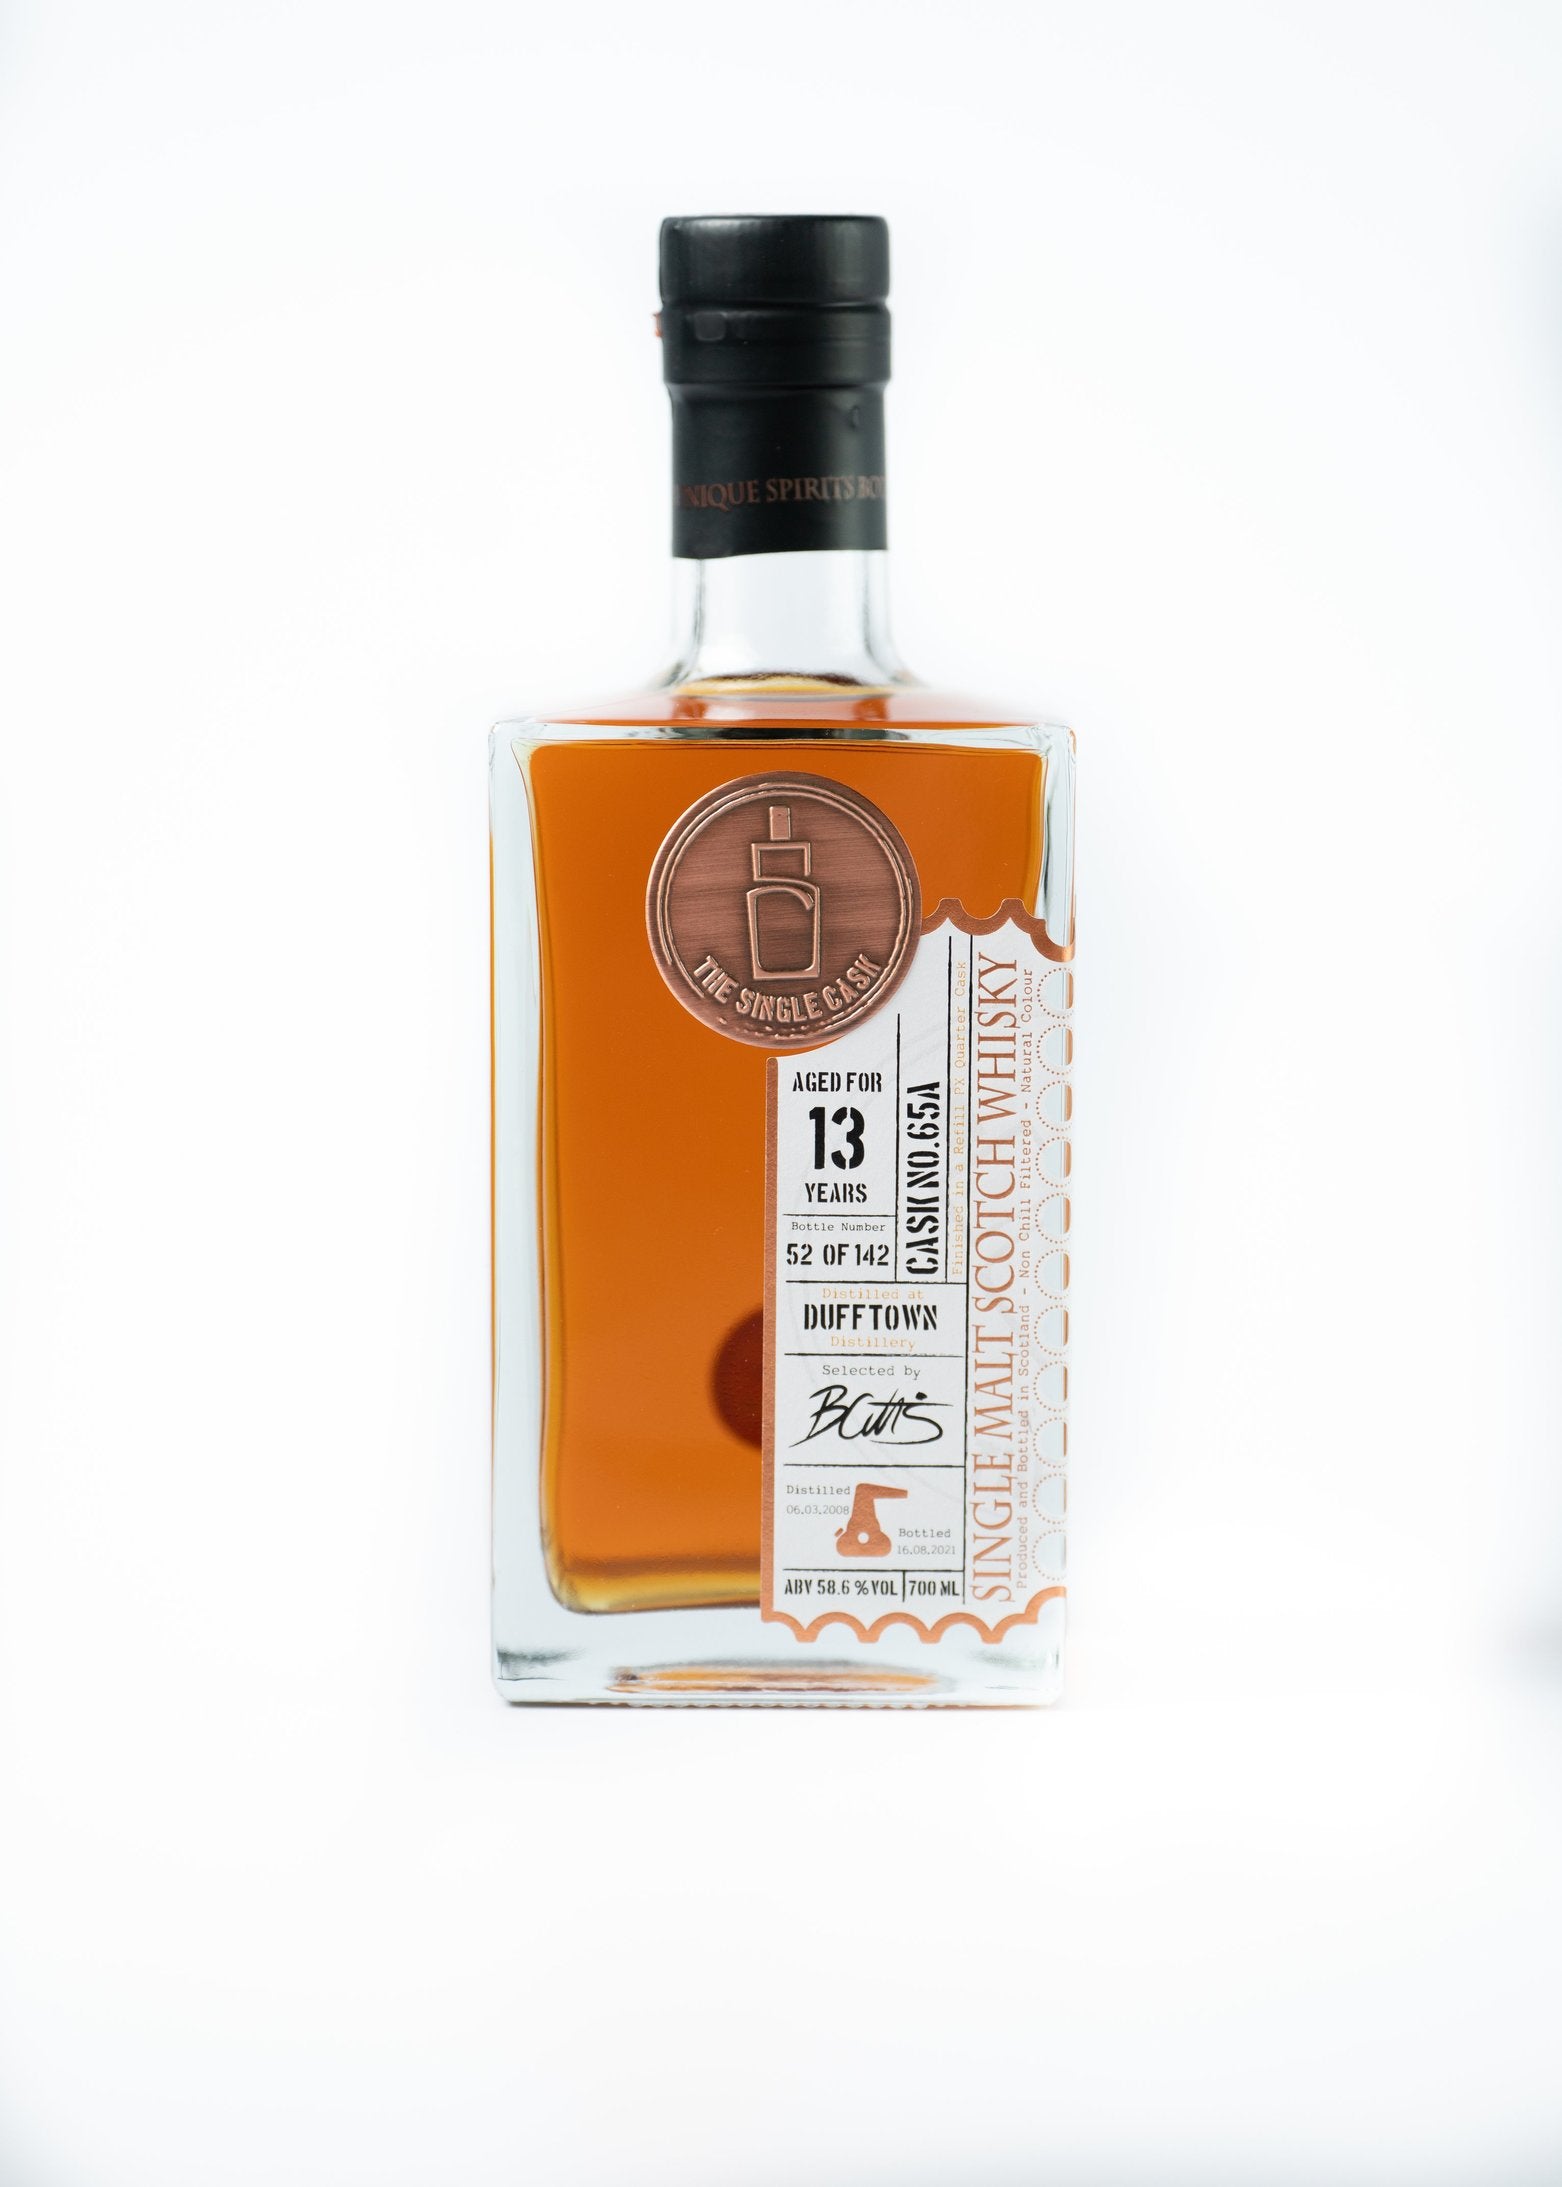 13 years old Dufftown scotch whisky from The Single Cask 